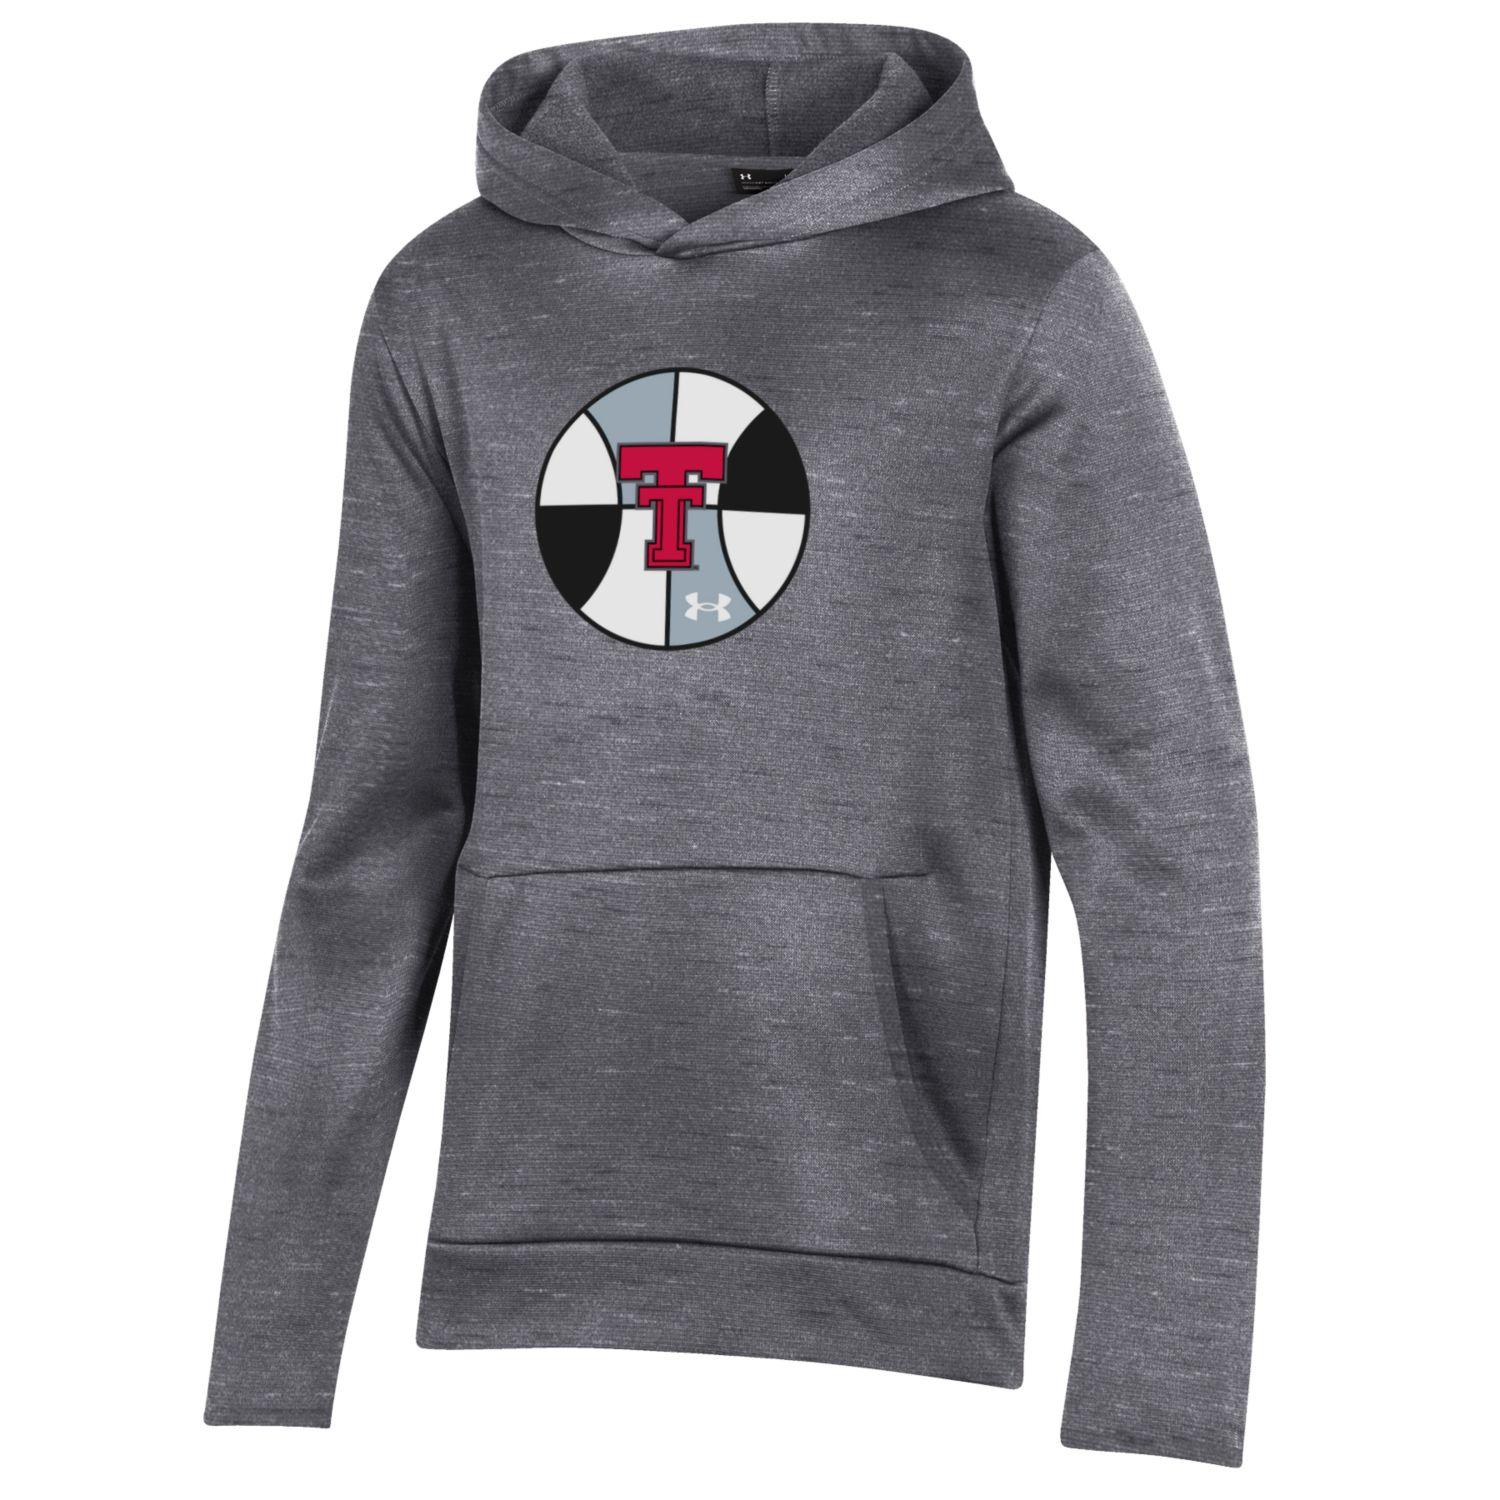 Under Armour Texas Tech Red Raiders Youth "Insider" Fleece Hoodie